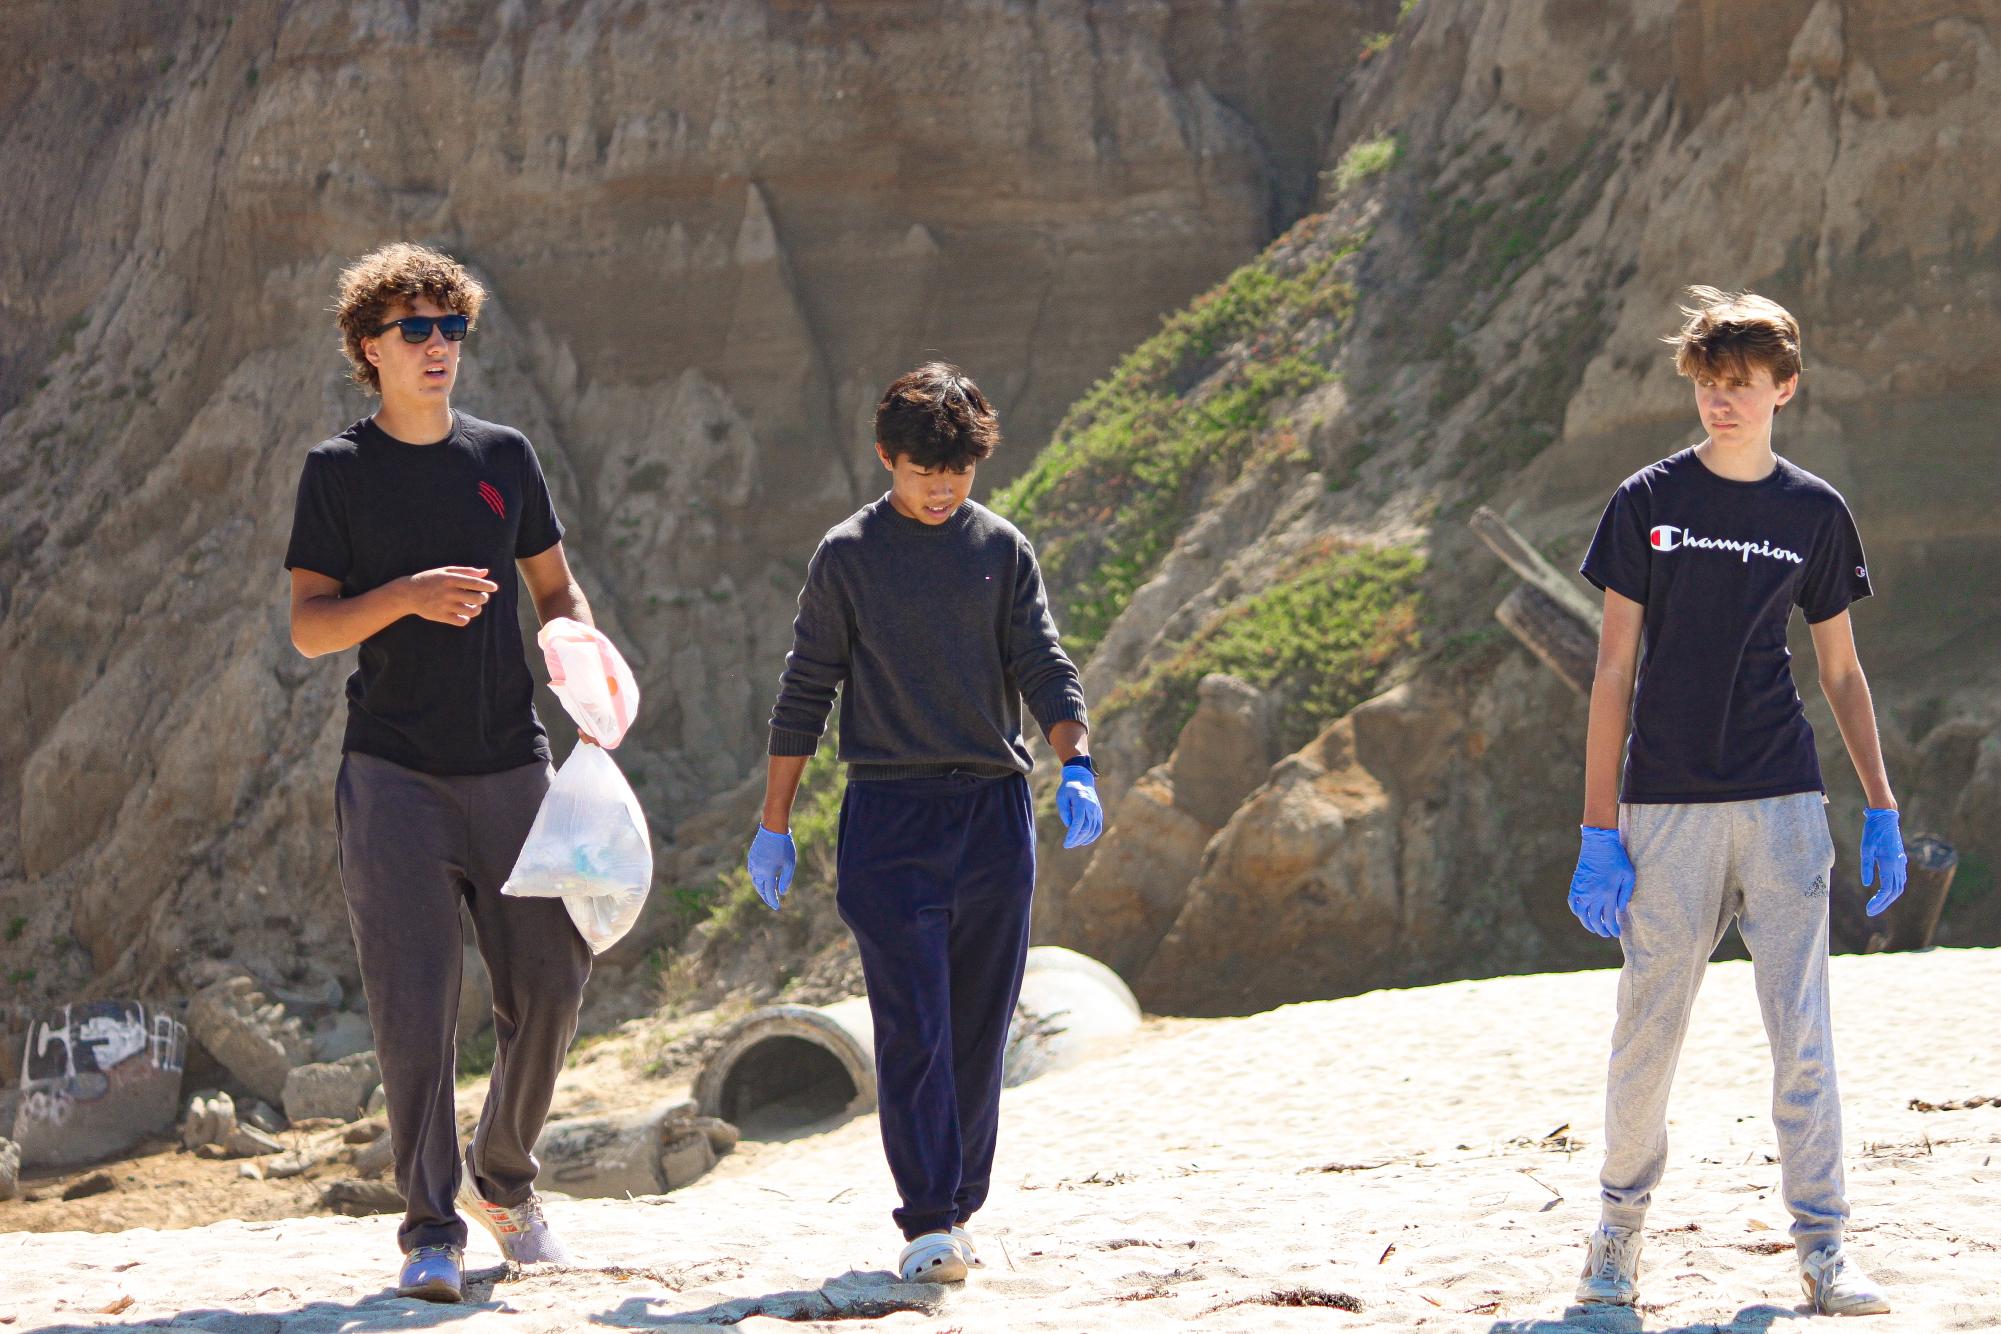 Juniors Luke Levitt, Spencer Phonsombat and Will Kriner met at Ross’ Cove beach on Saturday, October 21st as part of a trash cleanup organized by the Eco-pioneers.